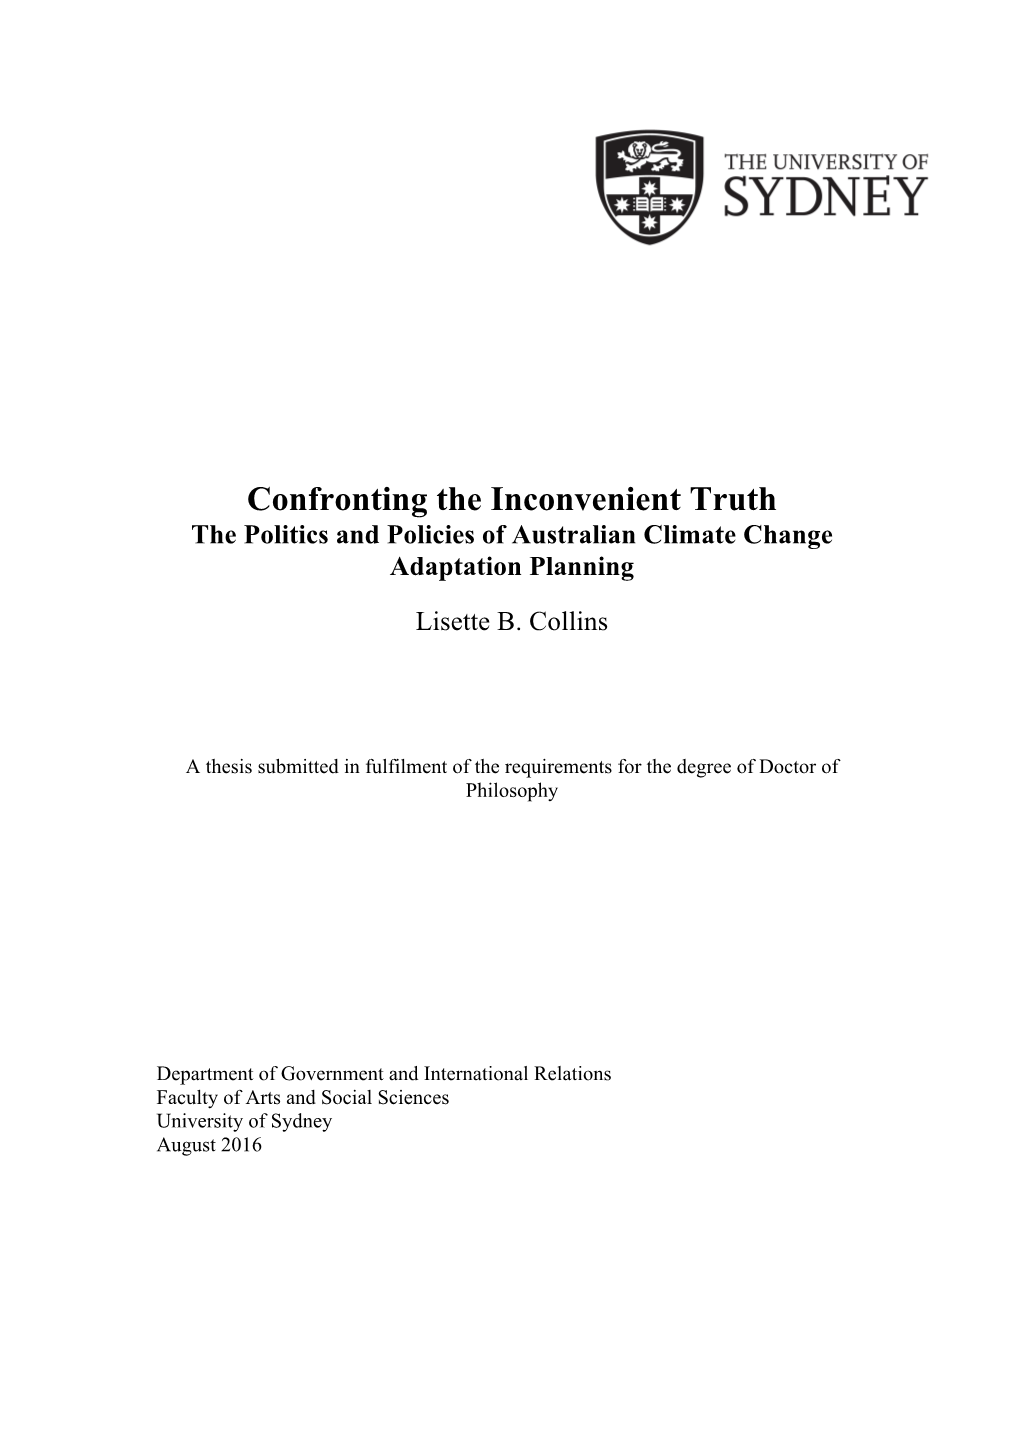 Confronting the Inconvenient Truth the Politics and Policies of Australian Climate Change Adaptation Planning